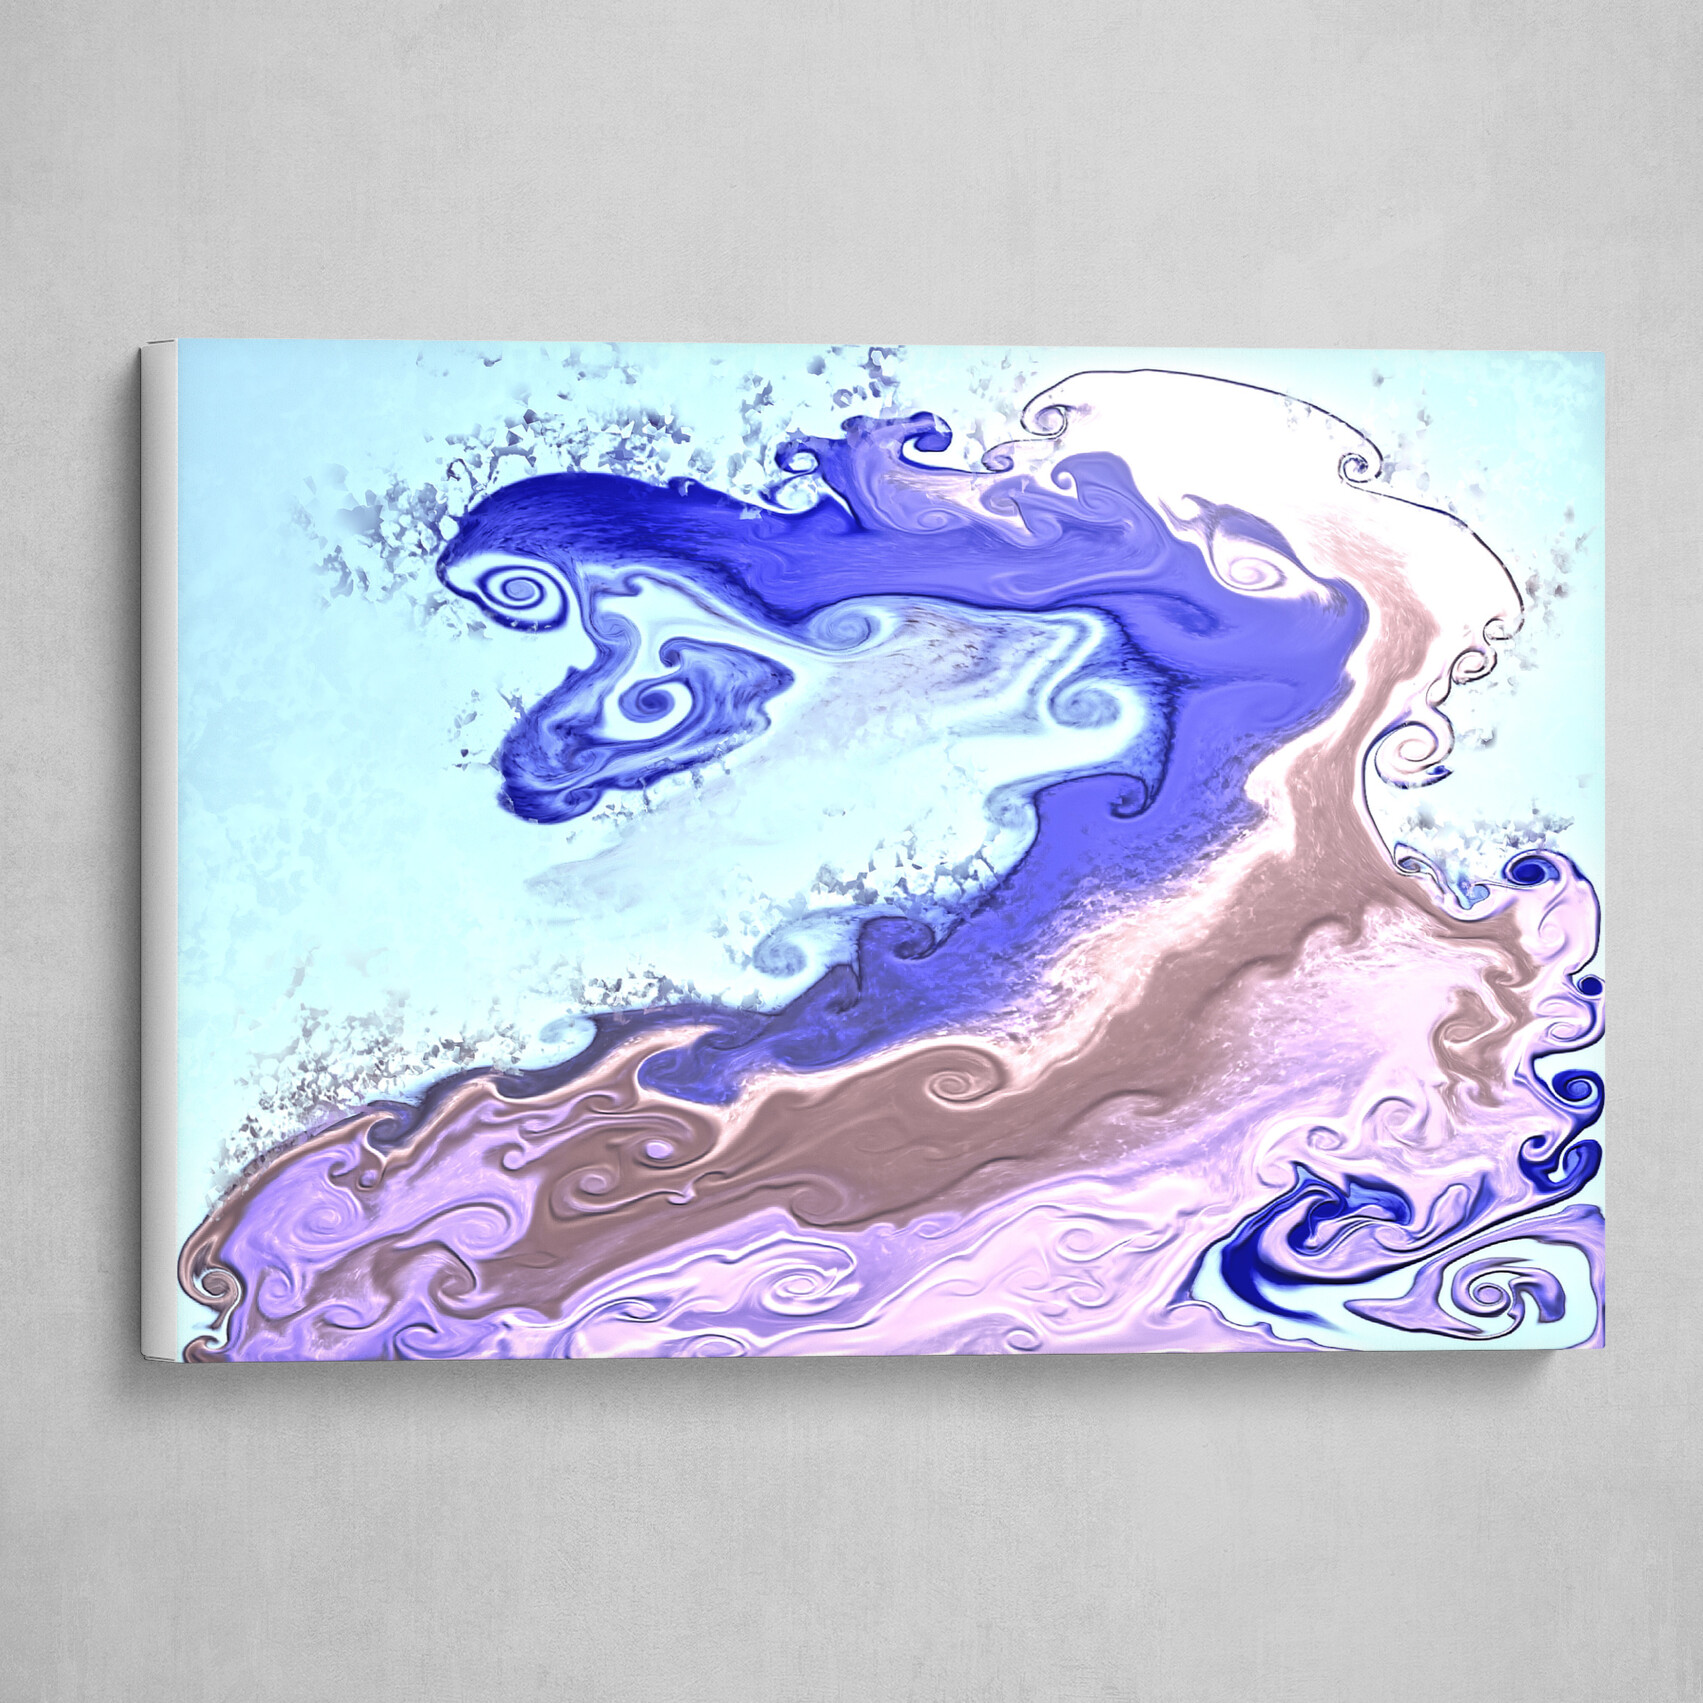 Purple and light blue fluid pour abstract art 3